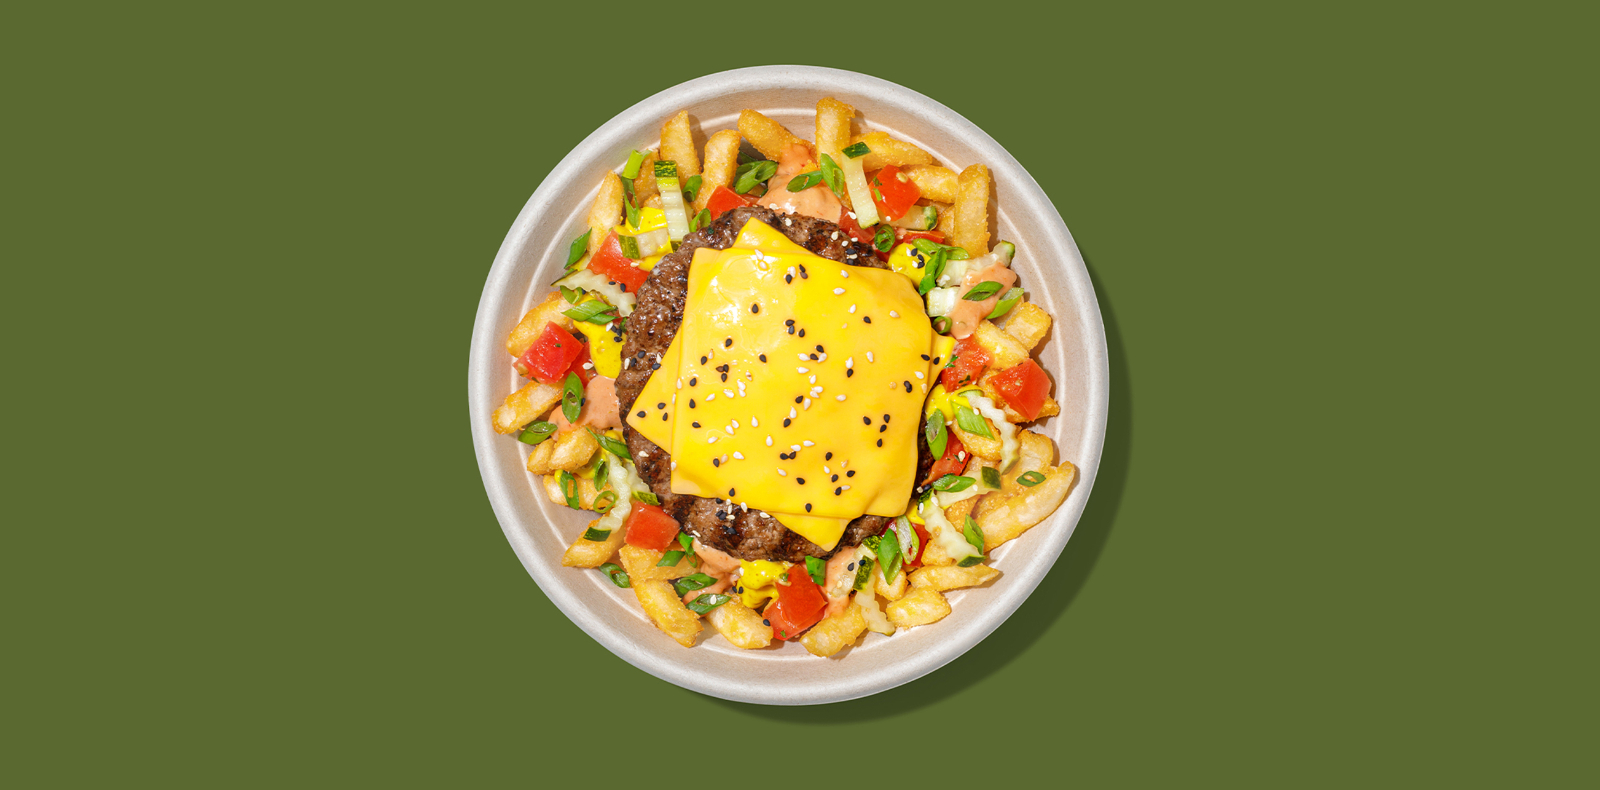  New Roadtrip Bowl called Cheeseburger FryBowl™ with Quarter-pound hamburger with double american cheese, bark + bite sauce-smothered fries, housemade liquid blanket® IPA mustard, pickles, tomatoes, green onions, sesame seeds alt tag